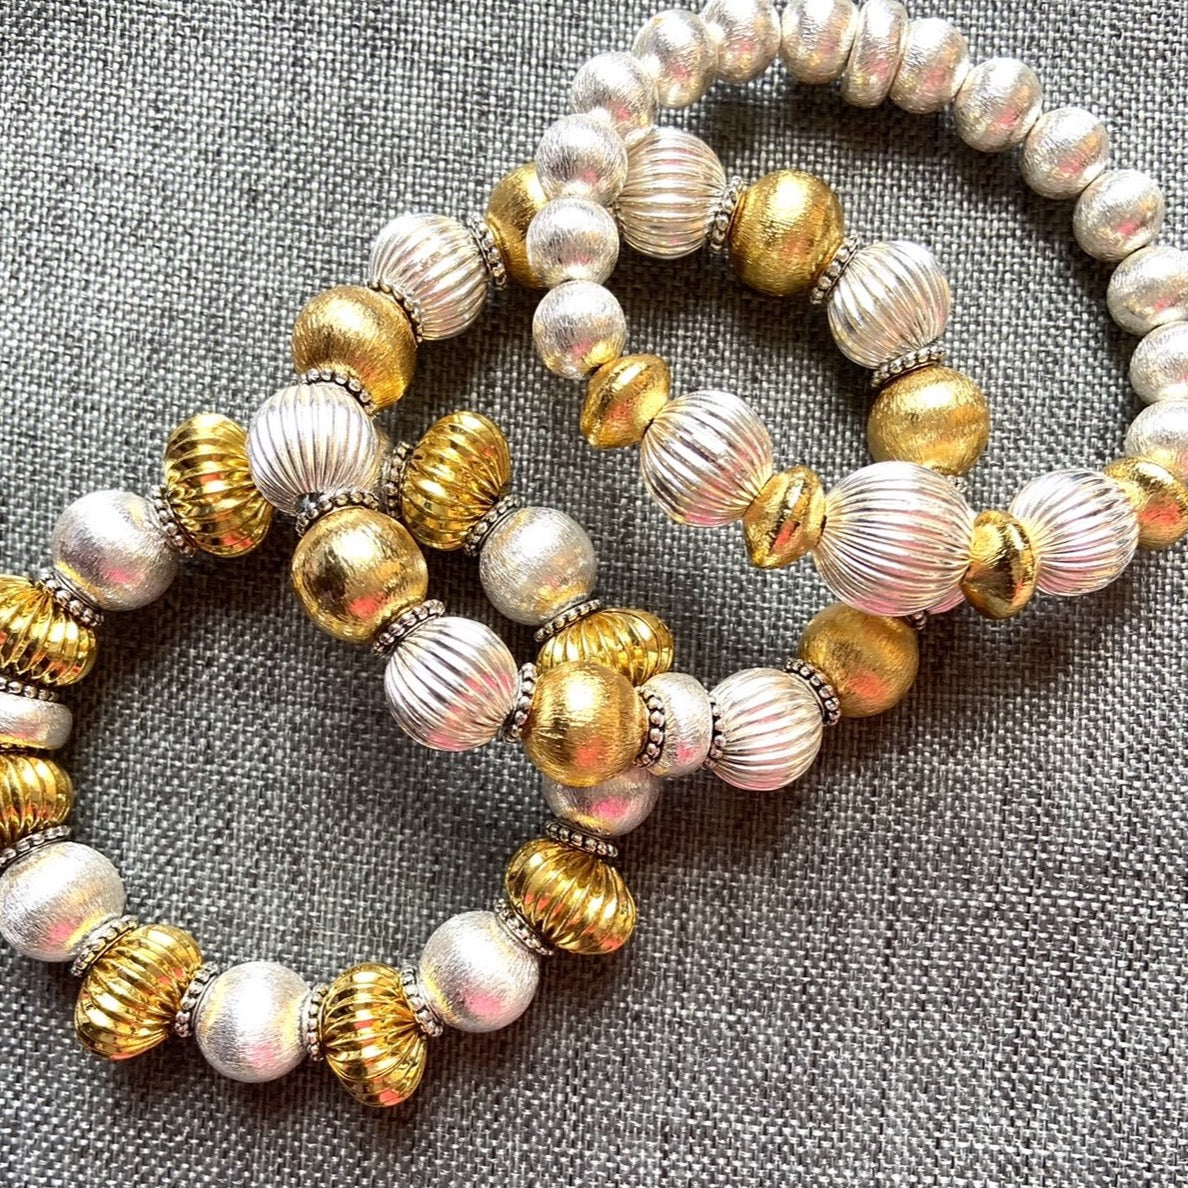 Brushed Gold-Filled and Silver Mixed Metal Beaded Bracelet